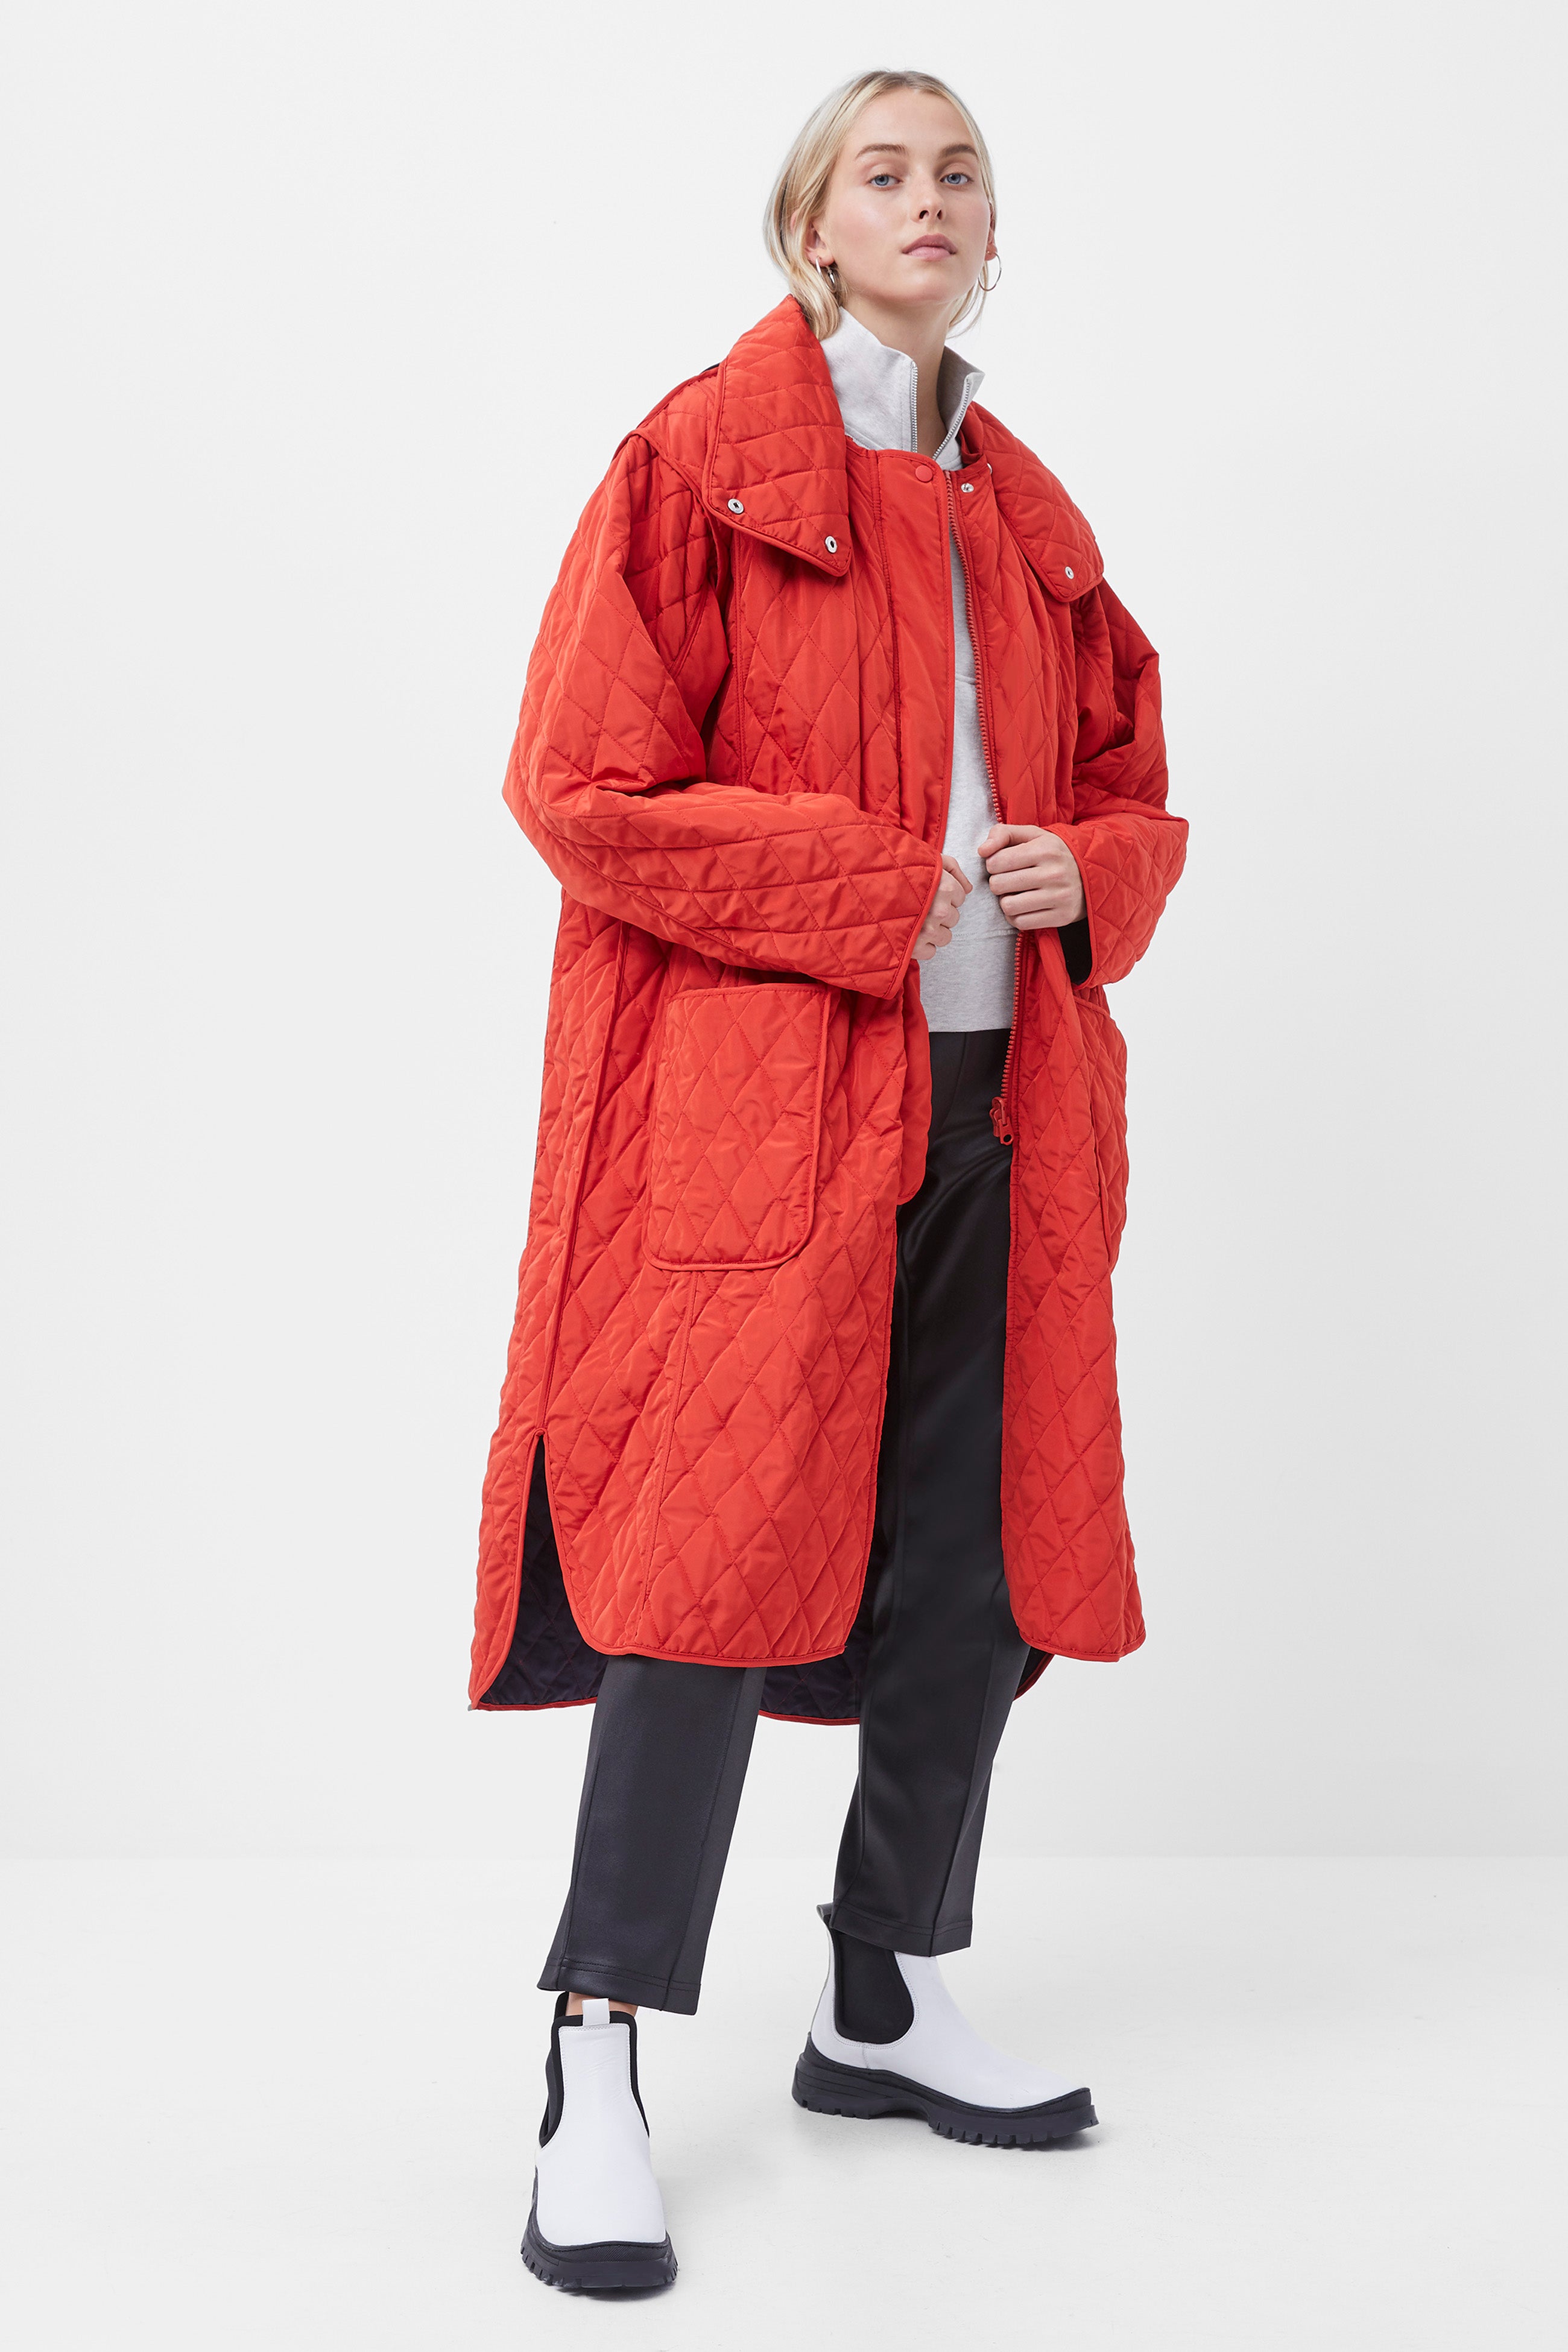 French Connection - Aris Quilt Reversible Coat | French Connection |  Coats & Jackets | Extra SmallSmall - Red/ Blue - Size: XSS